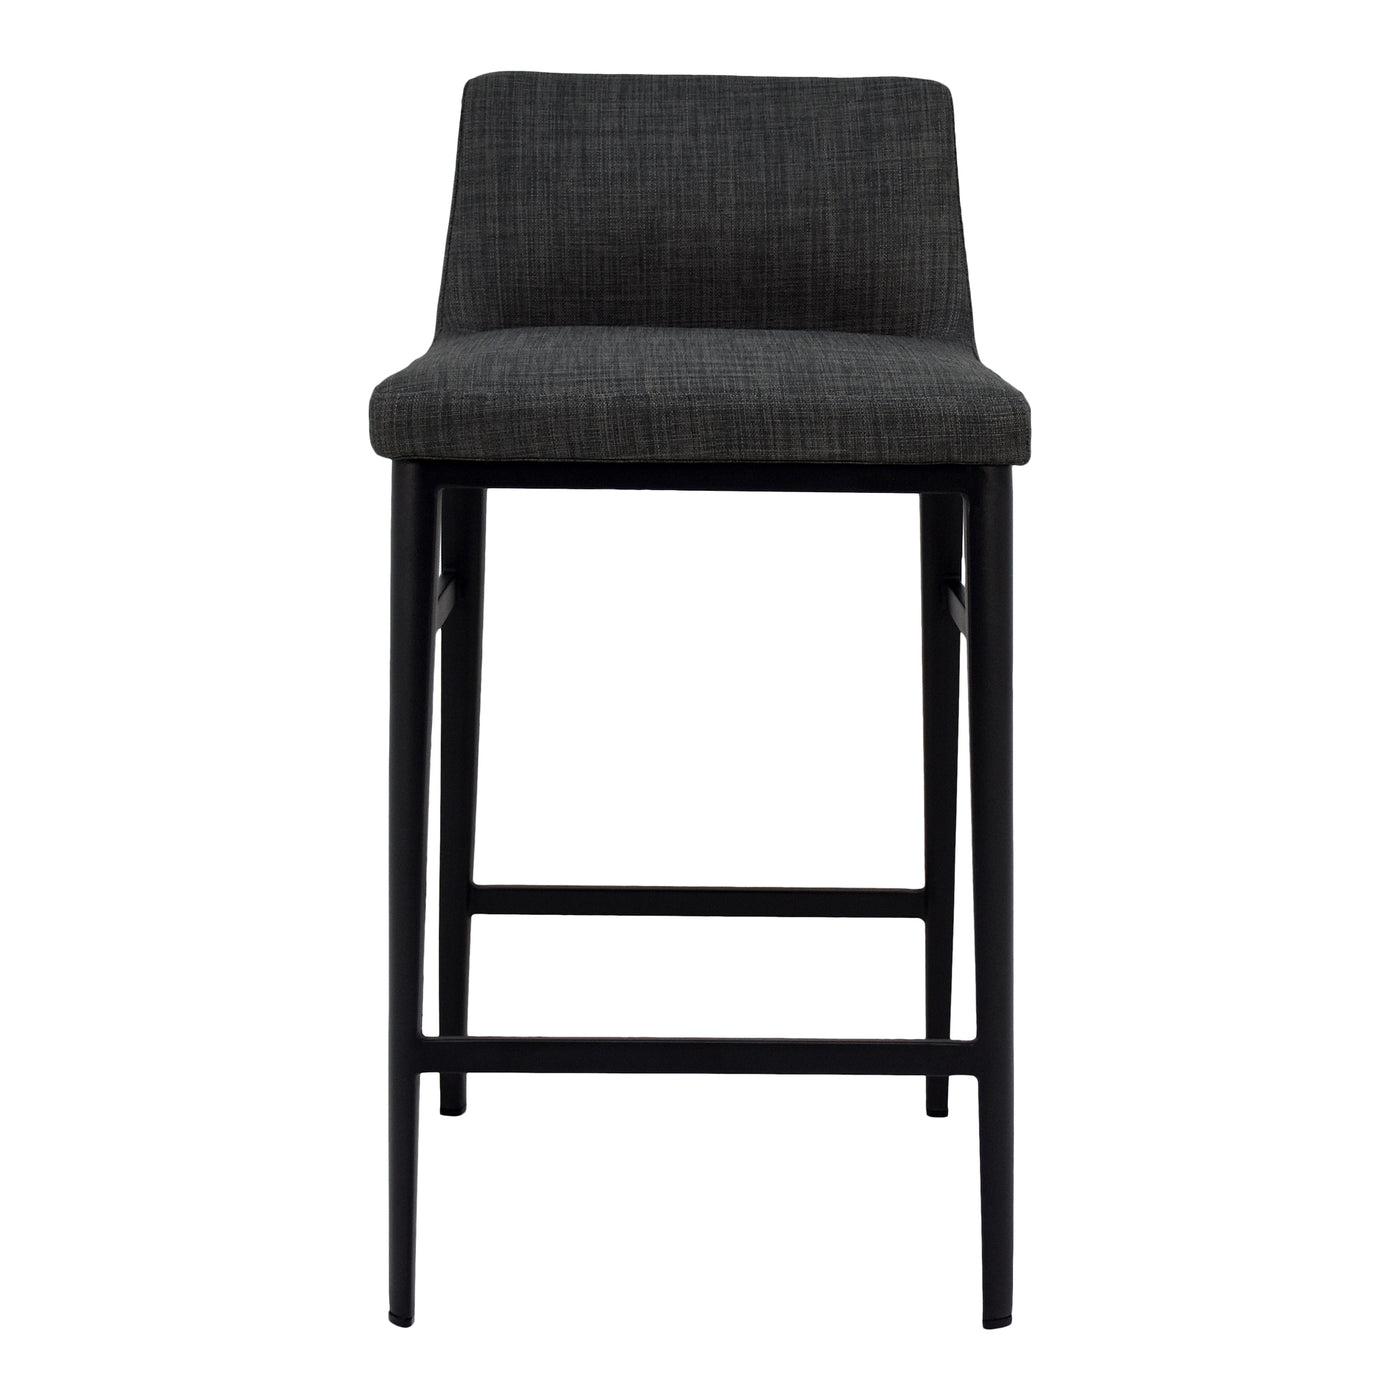 The low-backed profile of the Baron counter stool gives a stylish and compact aesthetic. The charcoal-grey mix upholstery ...